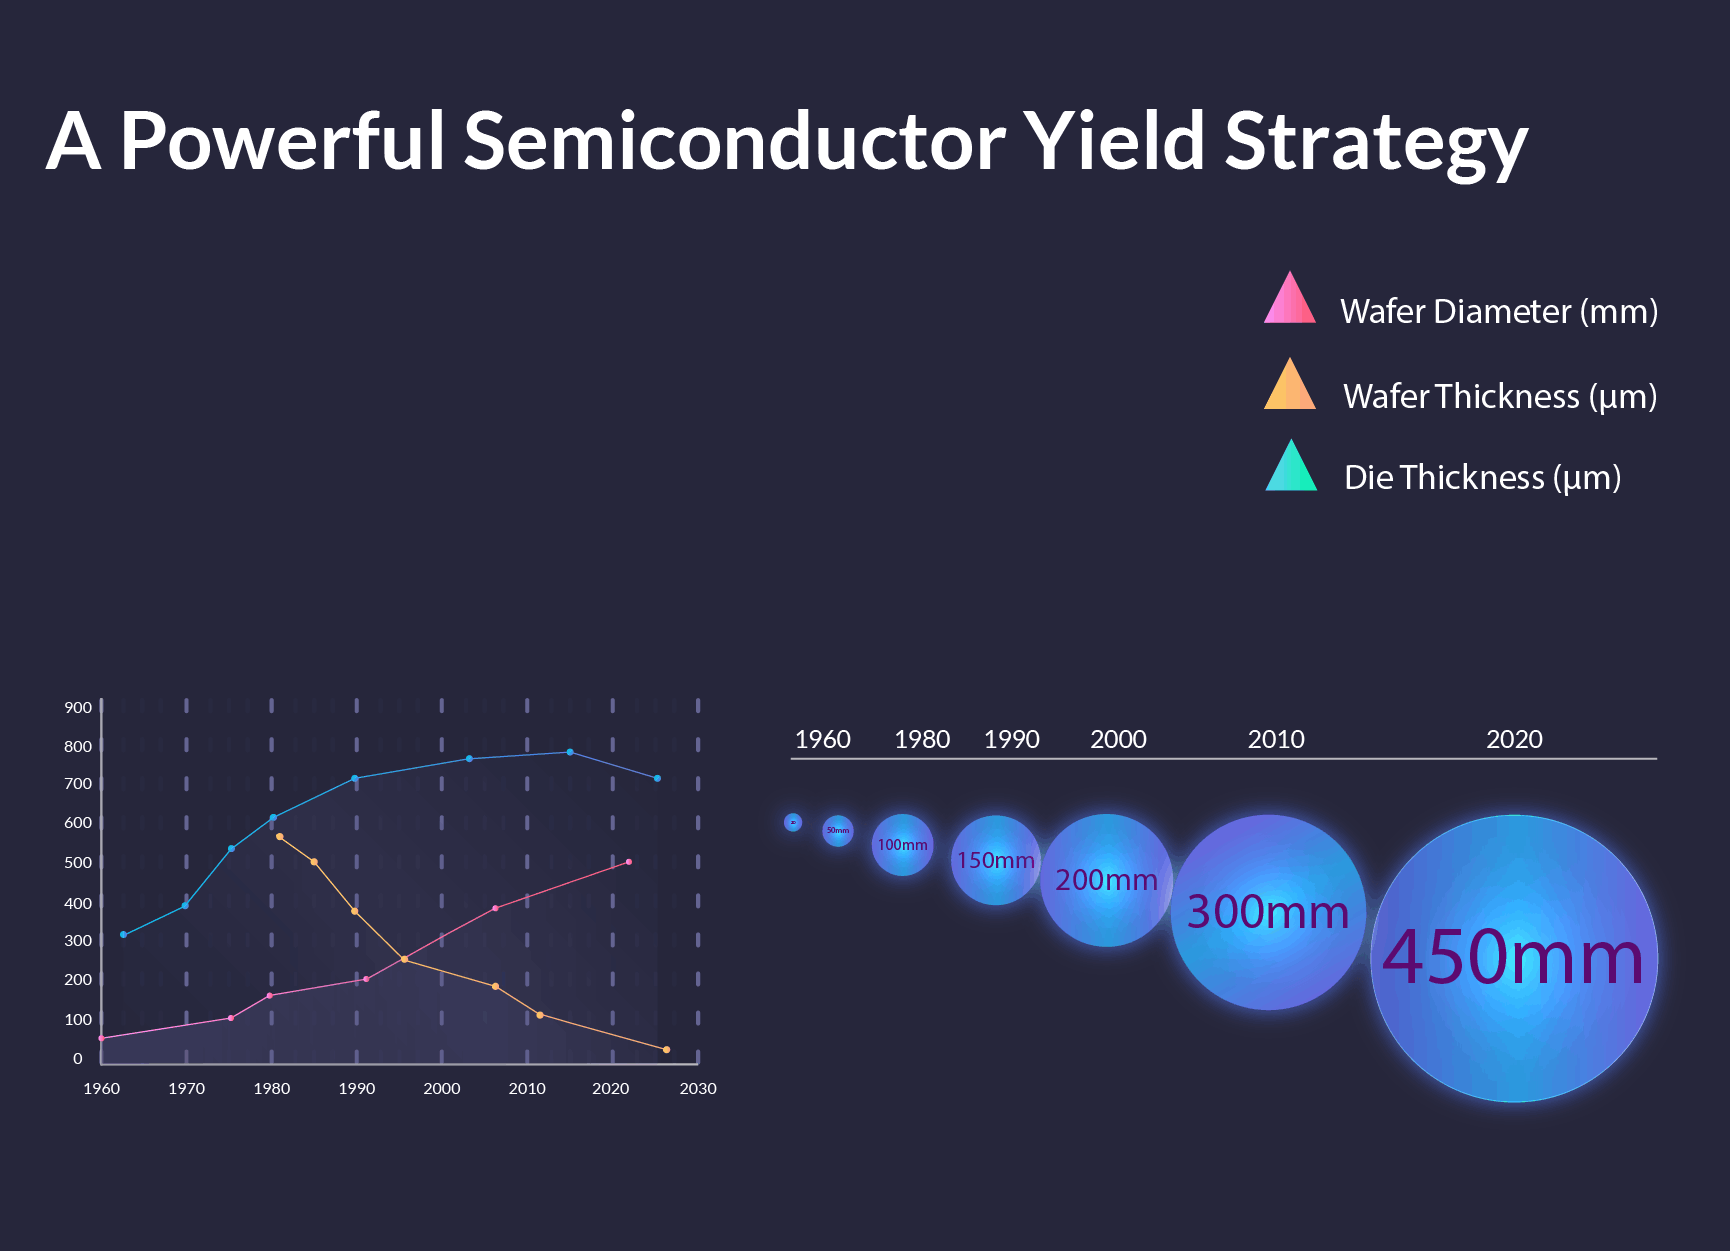 Effective Semiconductor Yield Strategy for Yield Improvement